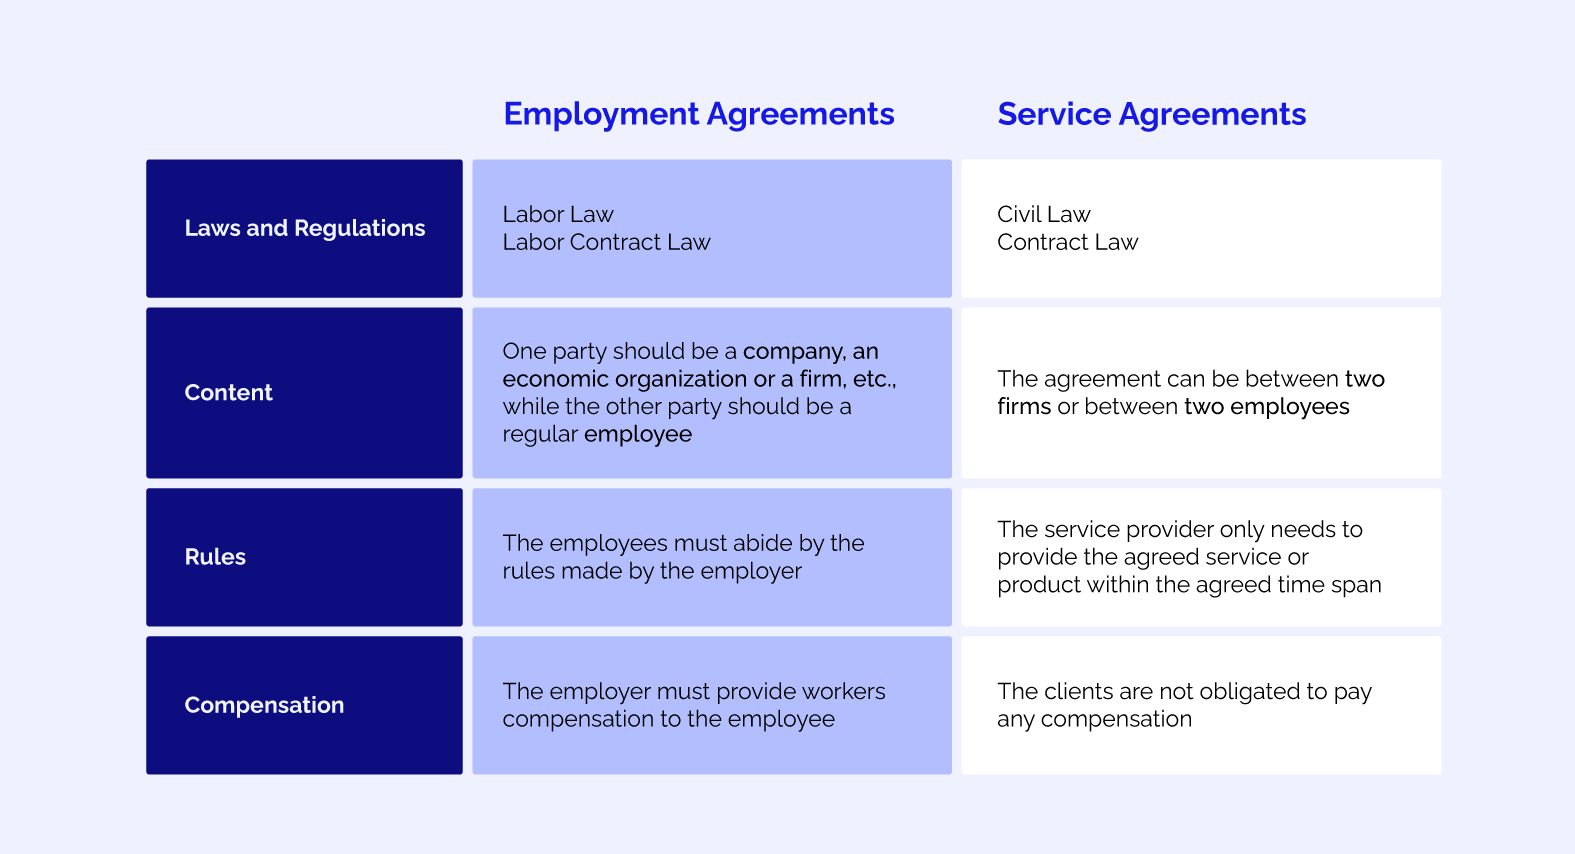 Differences between Employment Agreements and Service Agreements